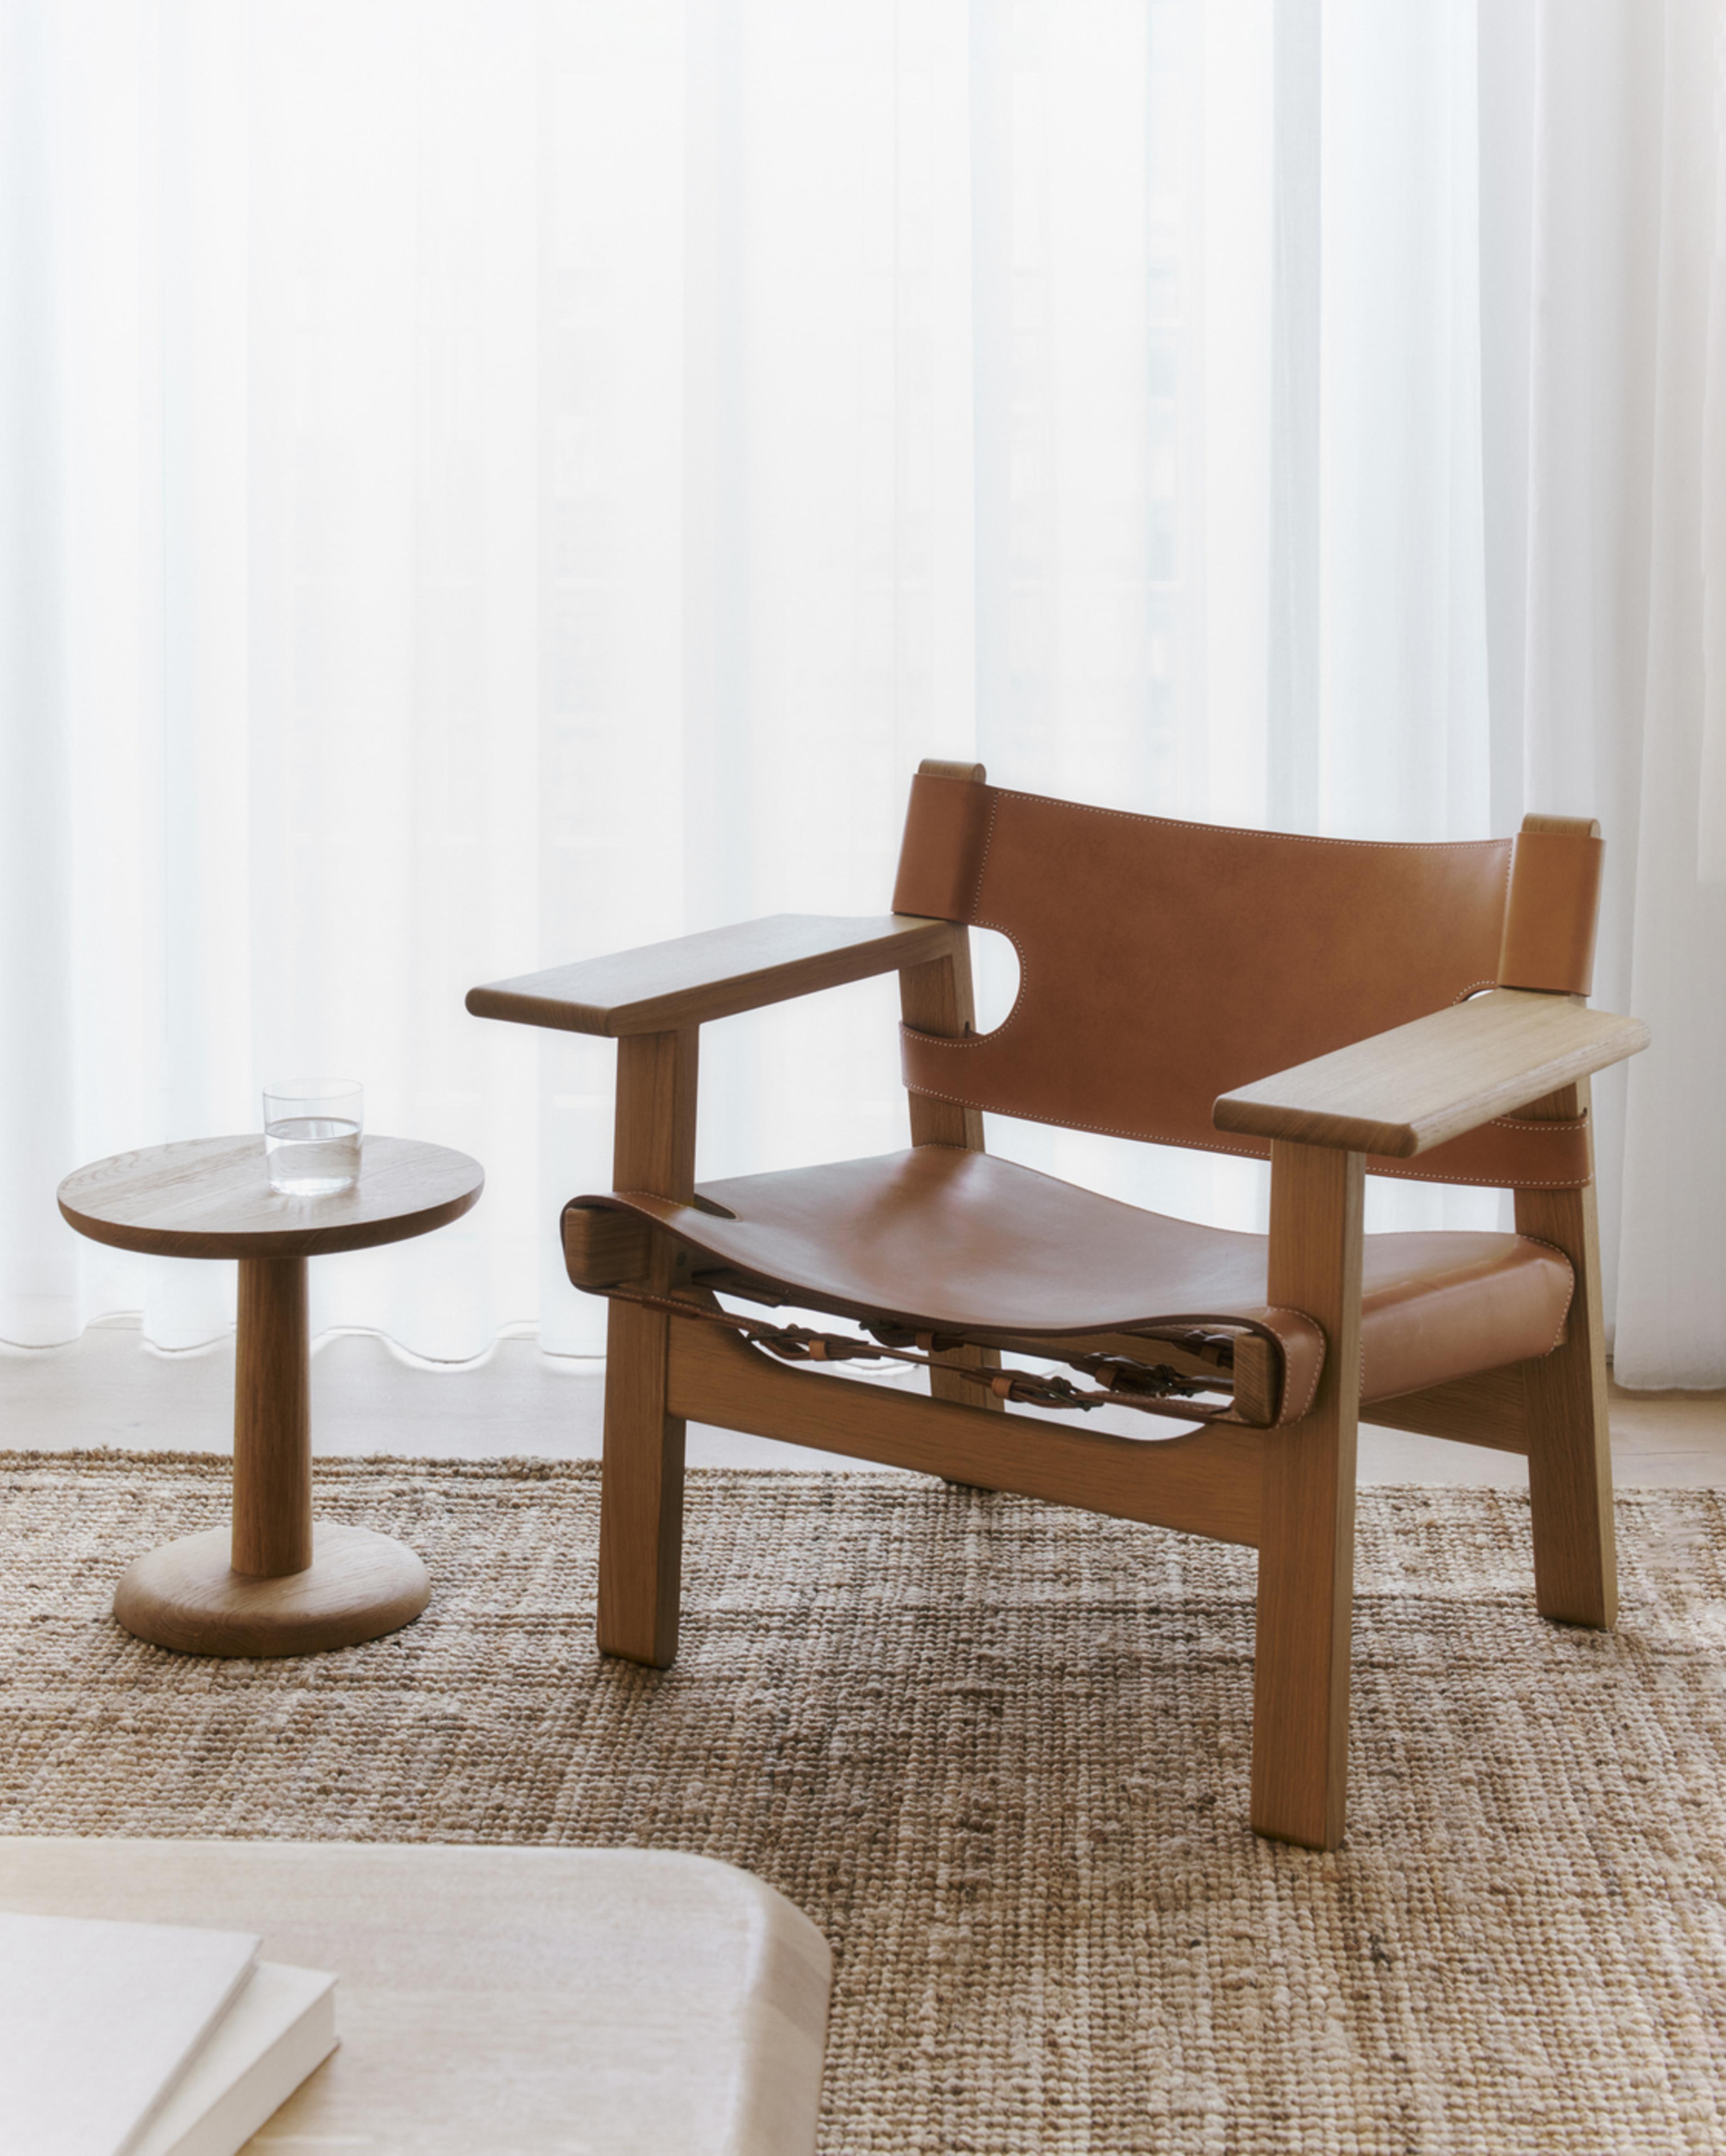 The Essence of an Icon - Fredericia Furniture